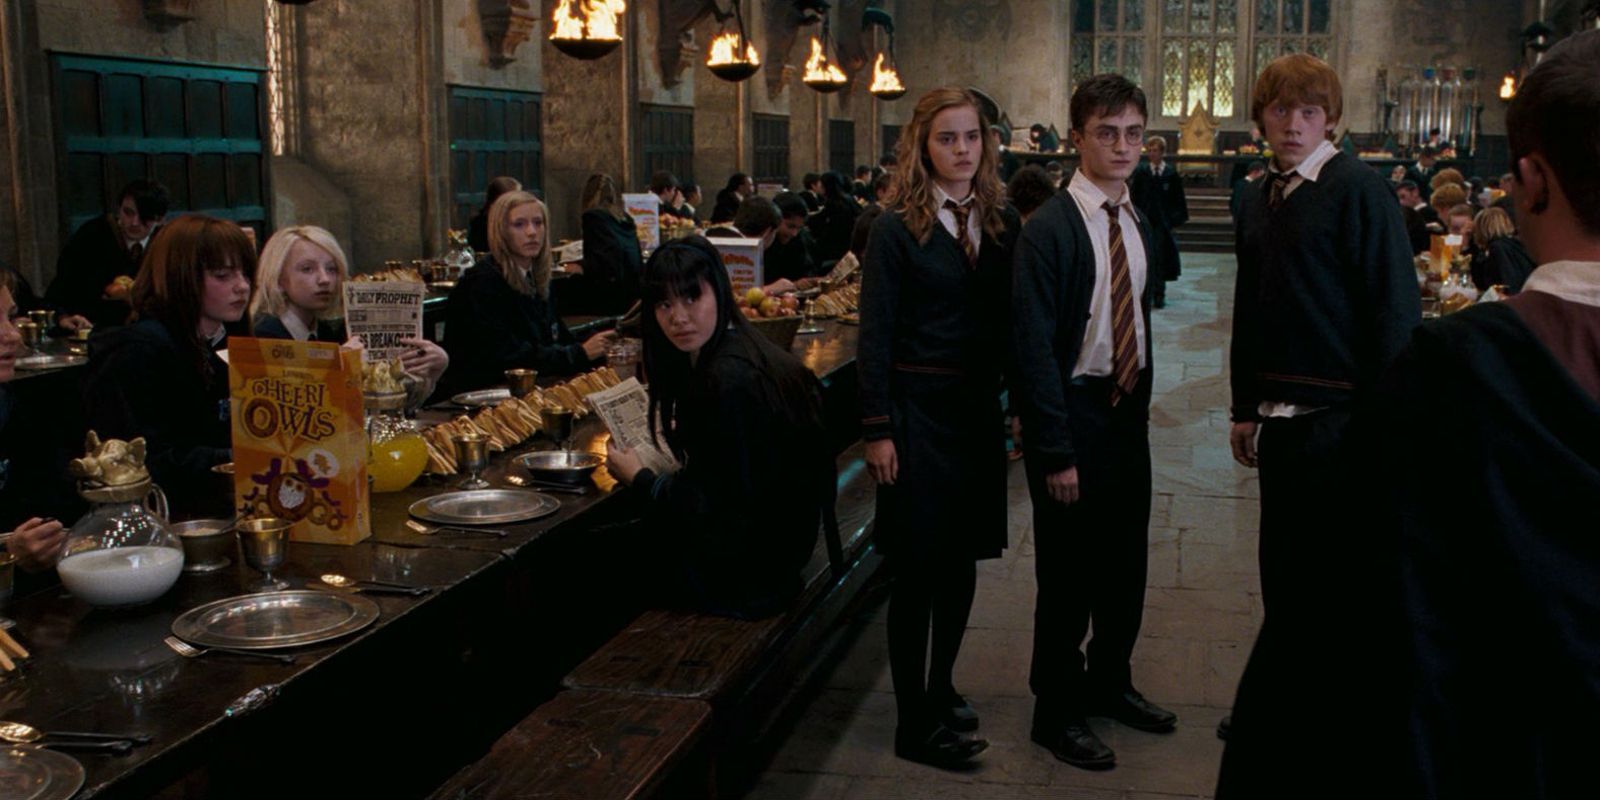 Hogwarts students having breakfast in the great hall in Harry Potter and the Order of the Phoenix.